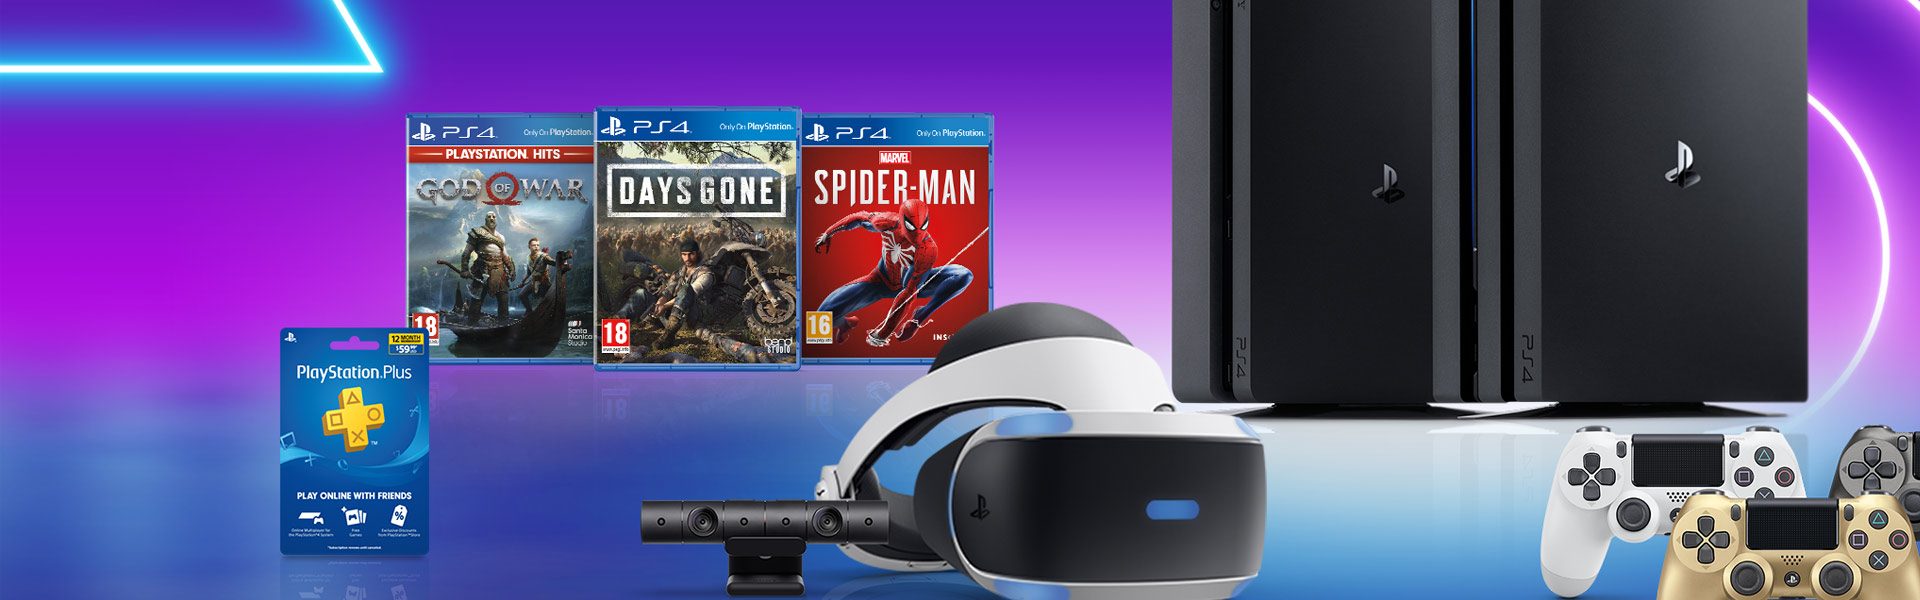 playstation plus cyber monday 2019